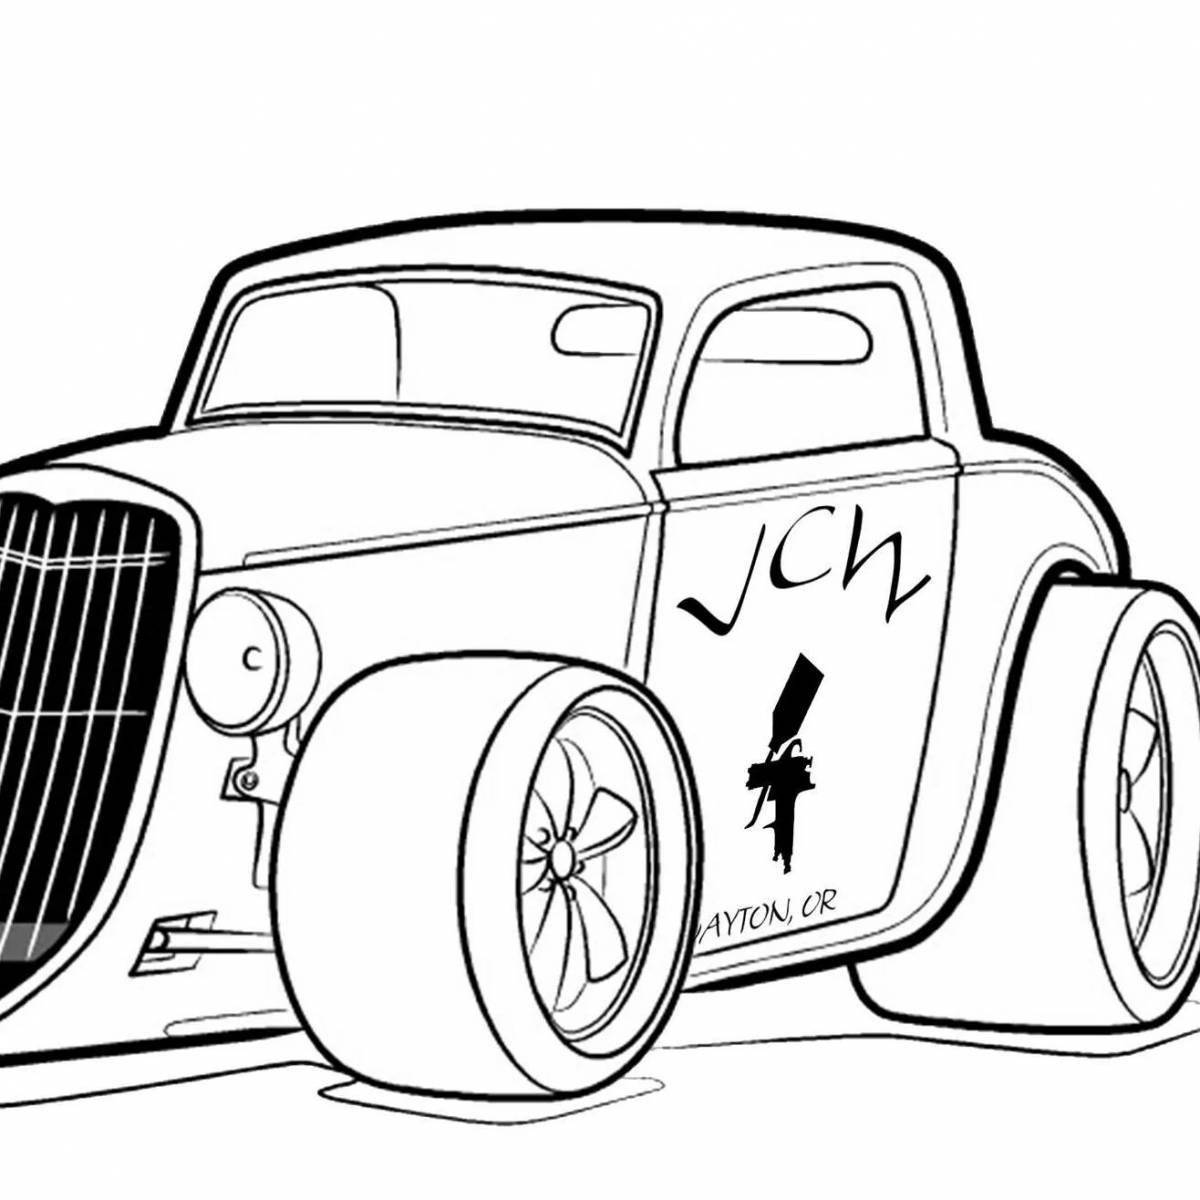 Glitter vintage cars coloring book